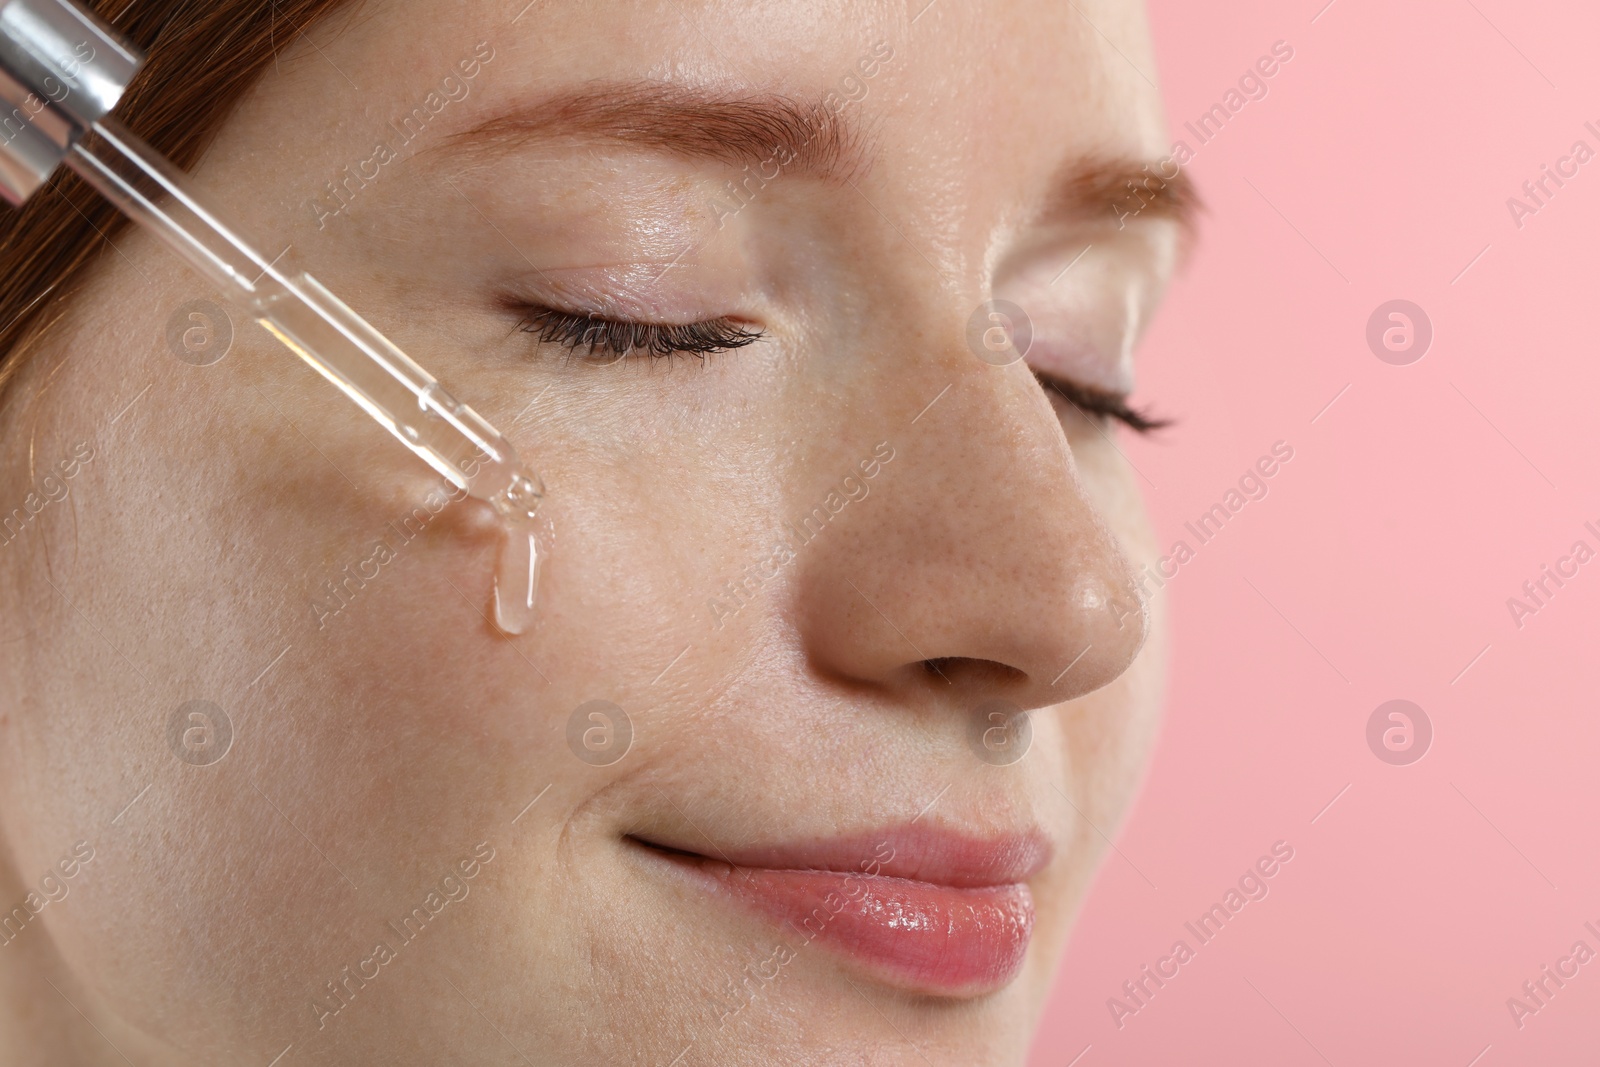 Photo of Beautiful woman with freckles applying cosmetic serum onto her face on pink background, closeup